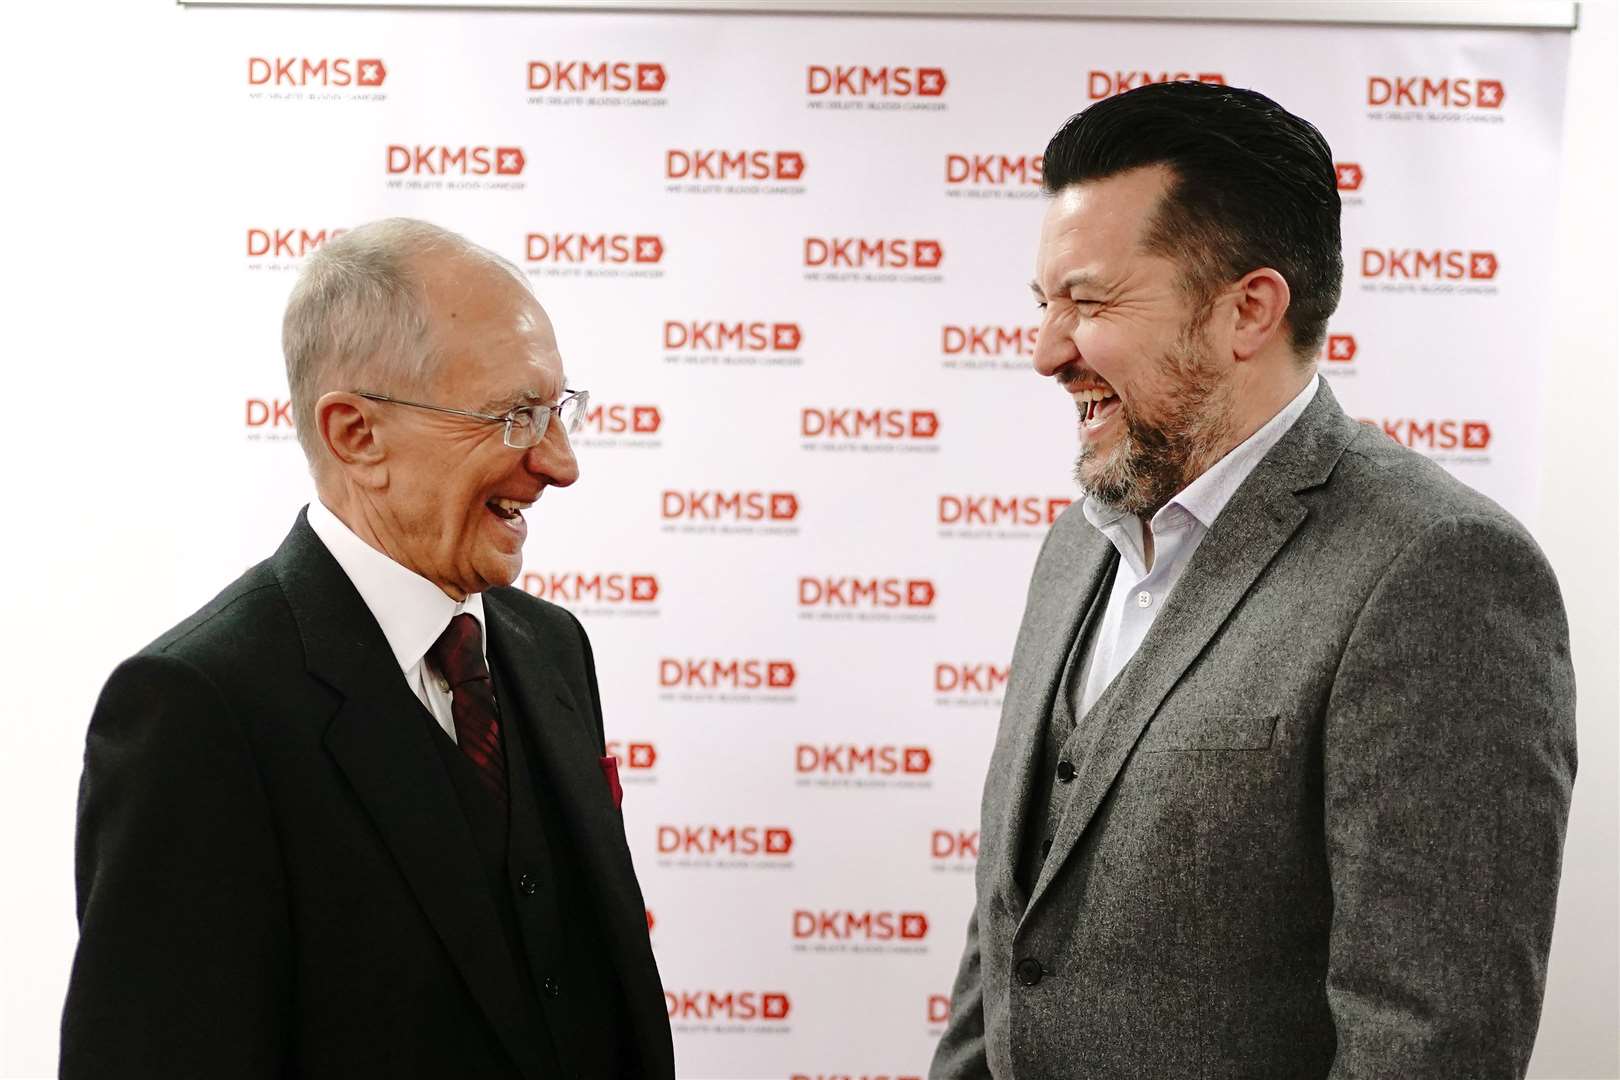 Ivor Godfrey-Davis (left) with his blood stem cell donor Mark Jones as they meet for the first time after the life-saving donation, at the offices of DKMS in London (Victoria Jones/PA)